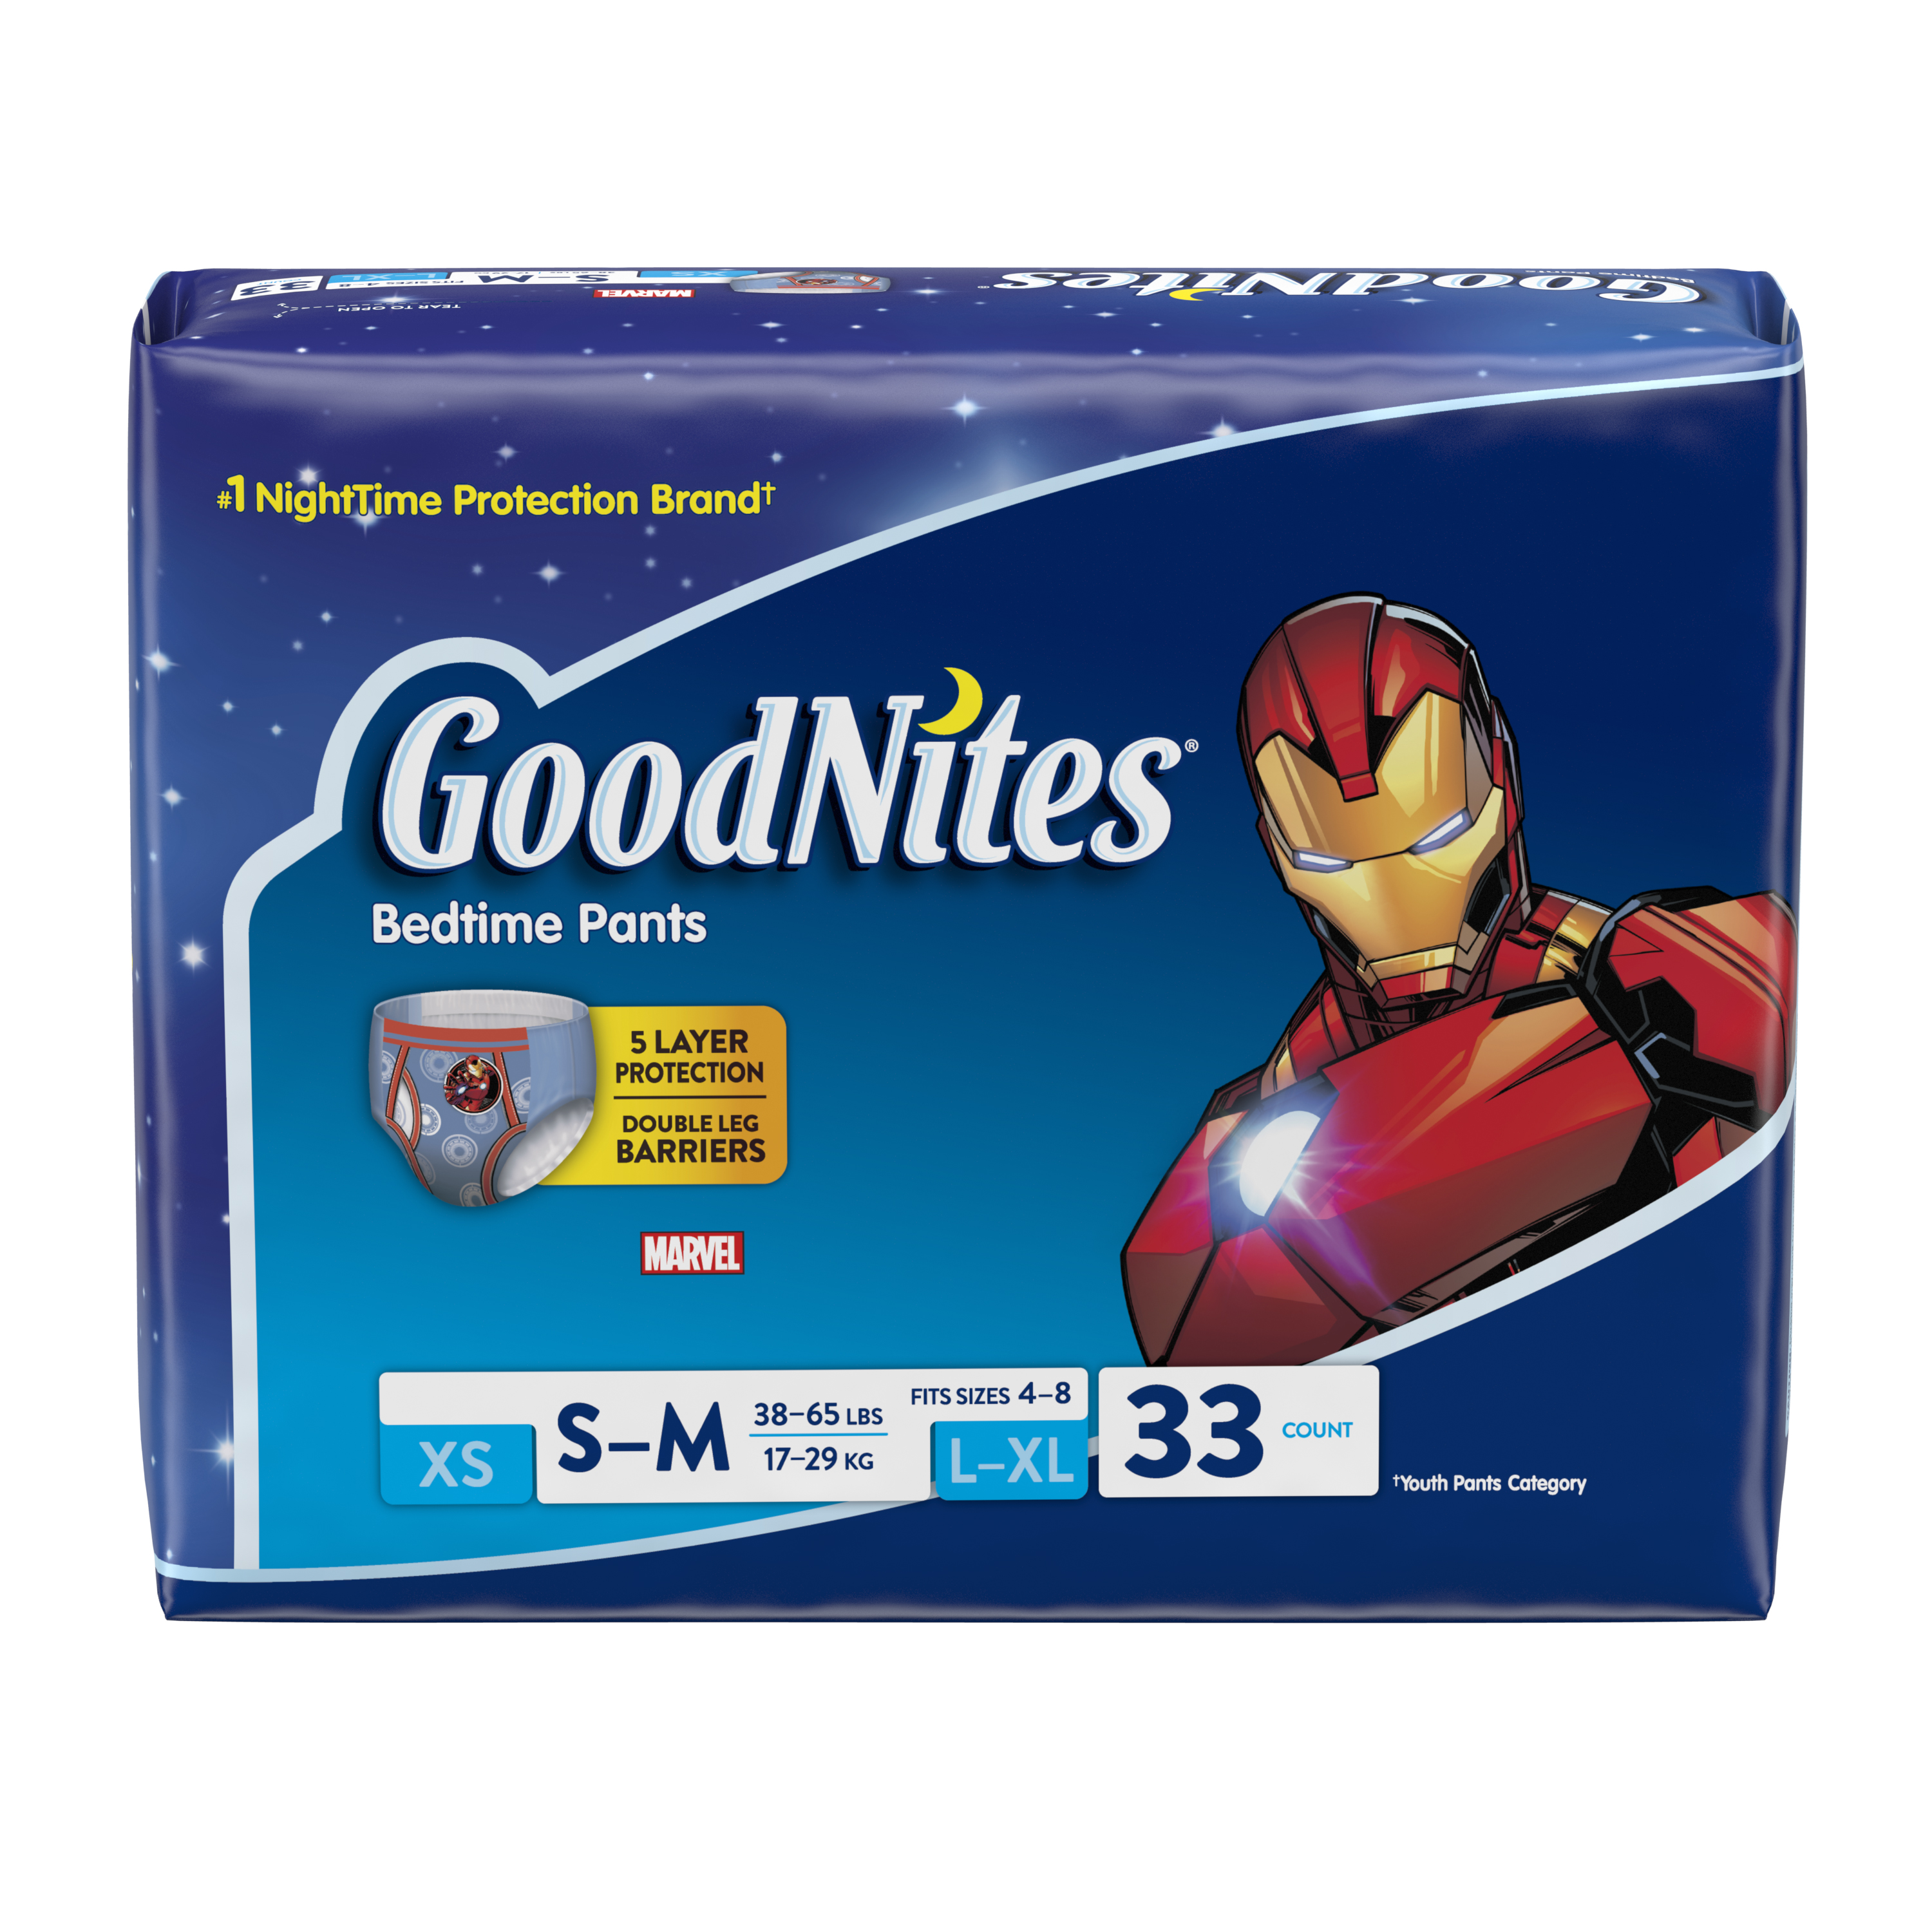 GoodNites Bedtime Bedwetting Underwear for Boys, Size S/M, 33 count - image 1 of 10